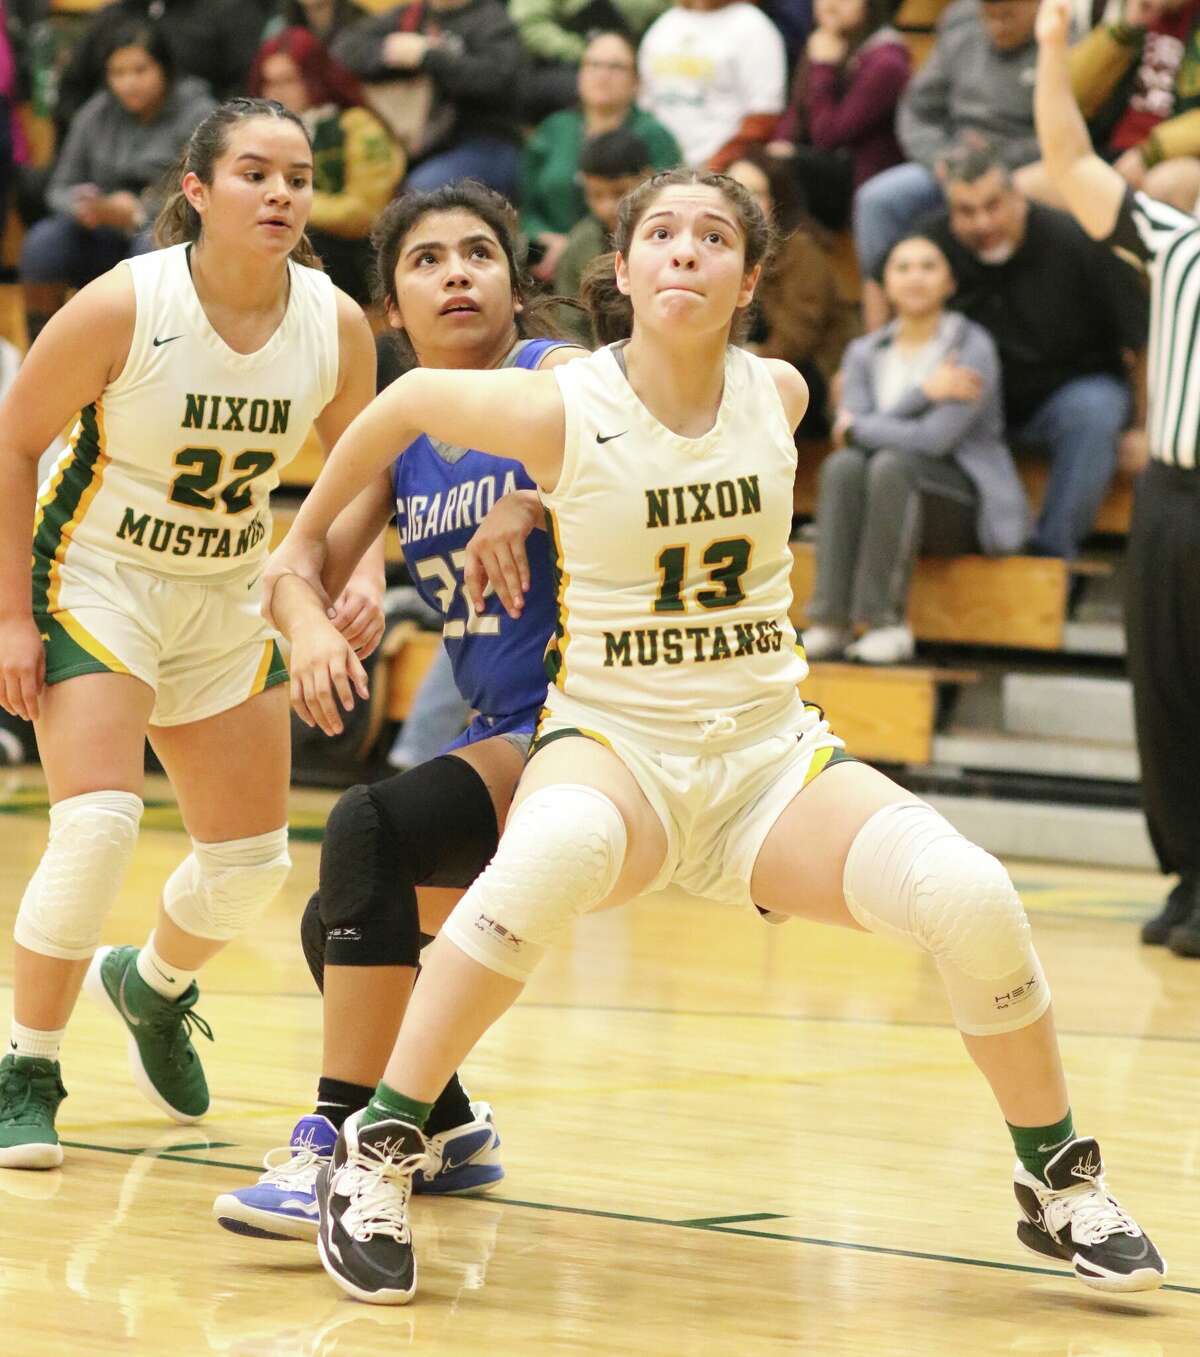 Shelby Rivera and the Nixon Lady Mustangs will open postseason play on Monday.